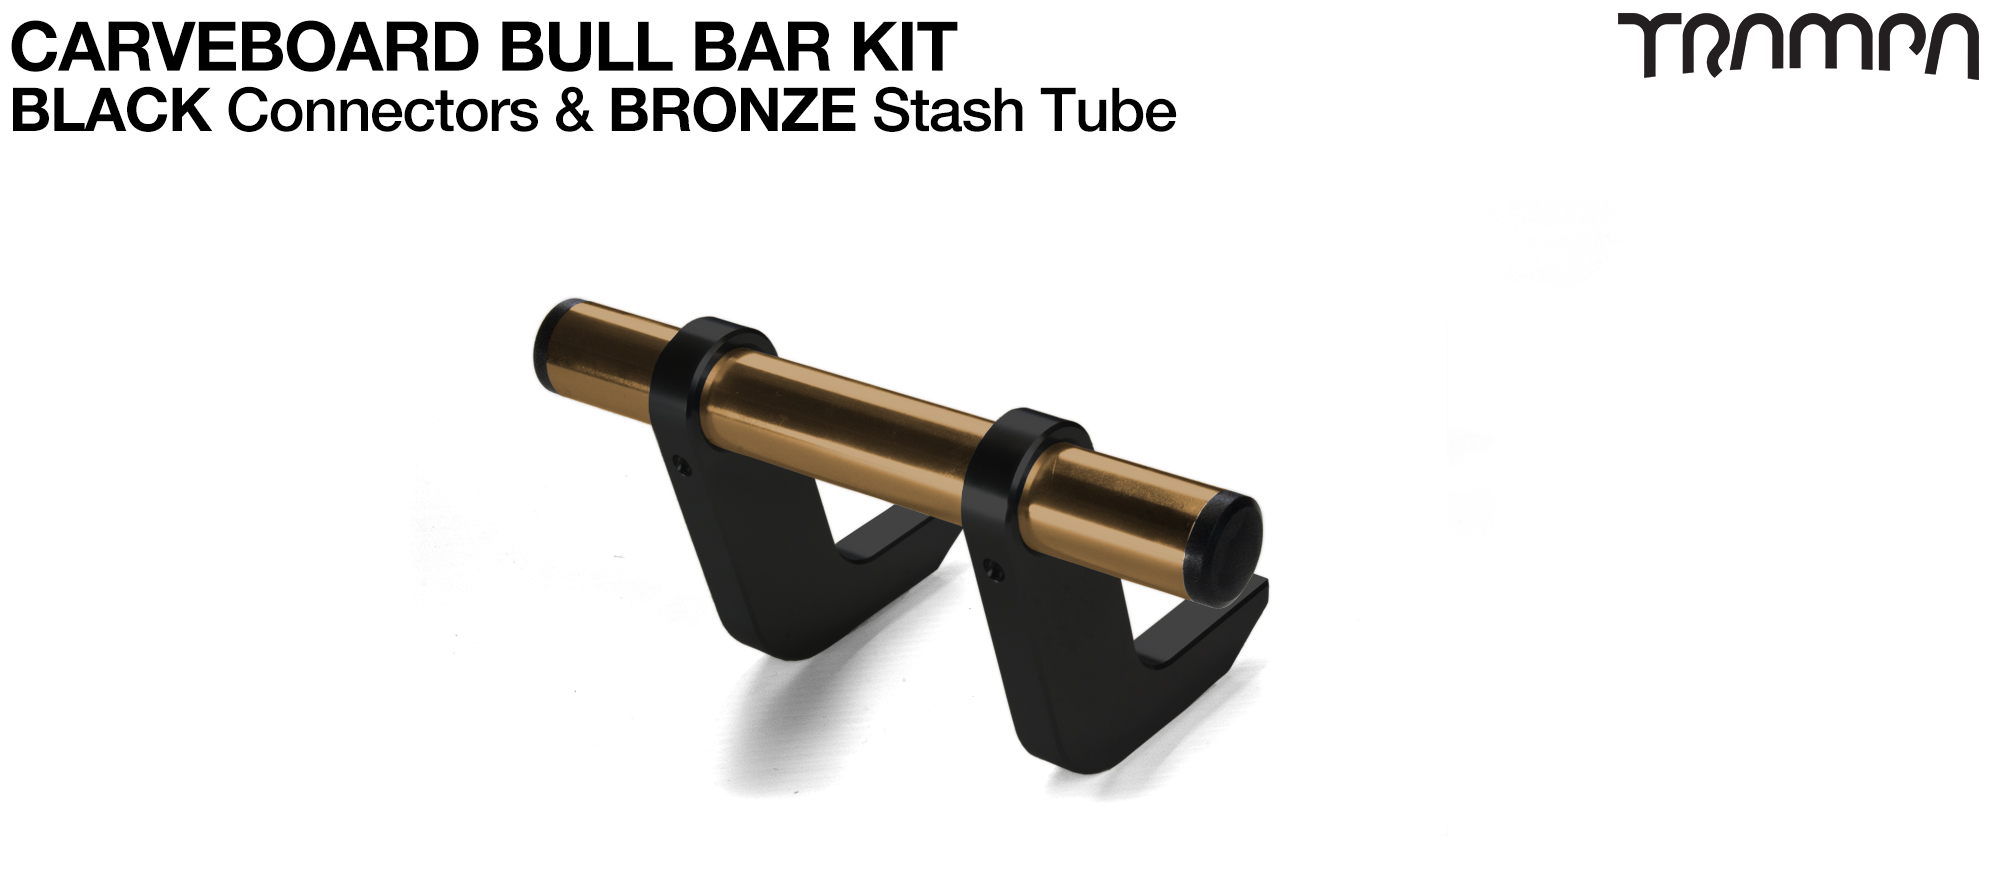 BLACK Uprights & BRONZE Crossbar BULL BARS for CARVE BOARDS using T6 Heat Treated CNC'd AluminIum Clamps, Hollow Aluminium Stash Tubes with Rubber end bungs 